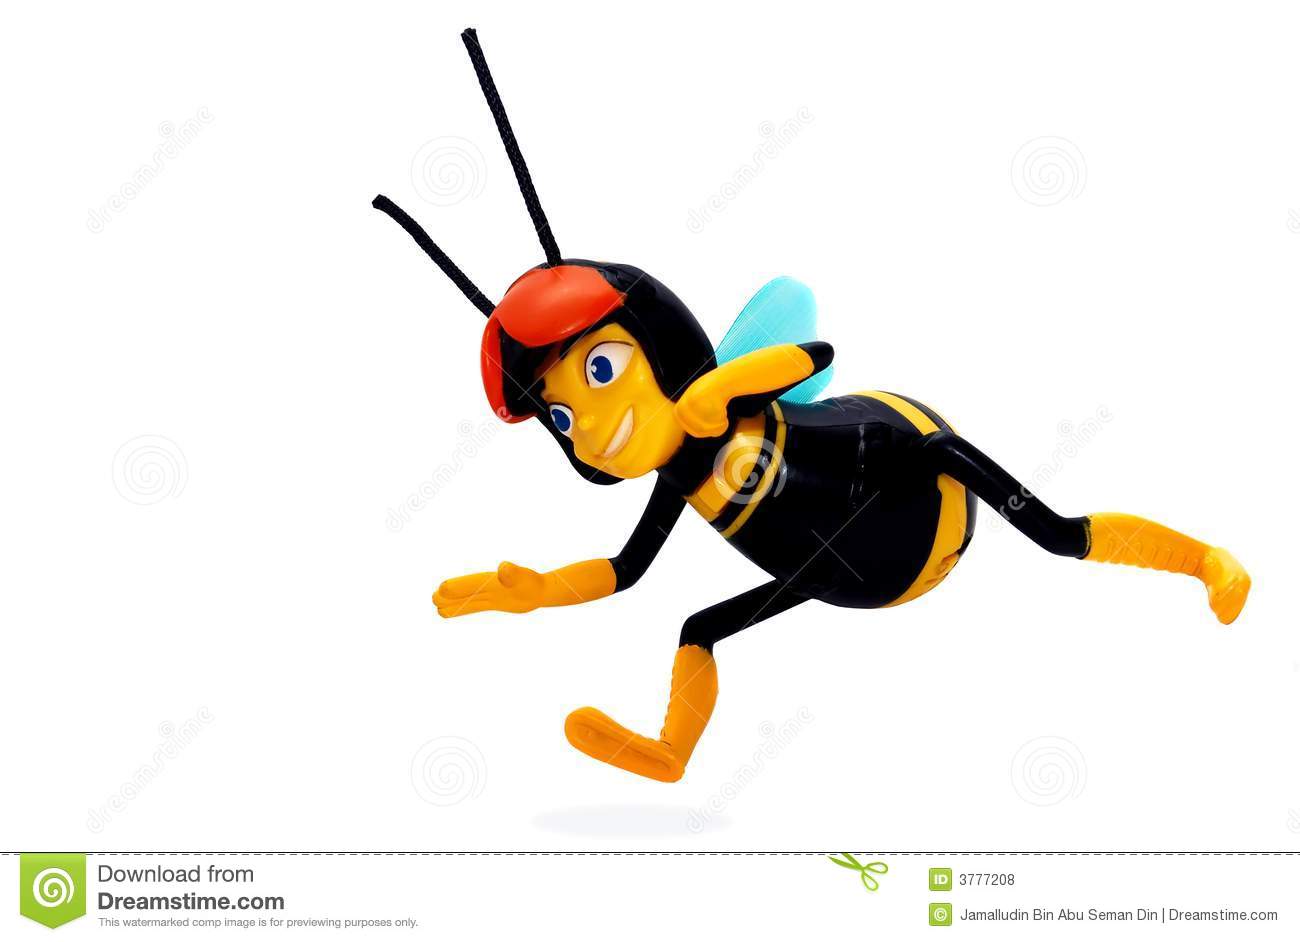 Bee Toy Royalty Free Stock Photos   Image  3777208